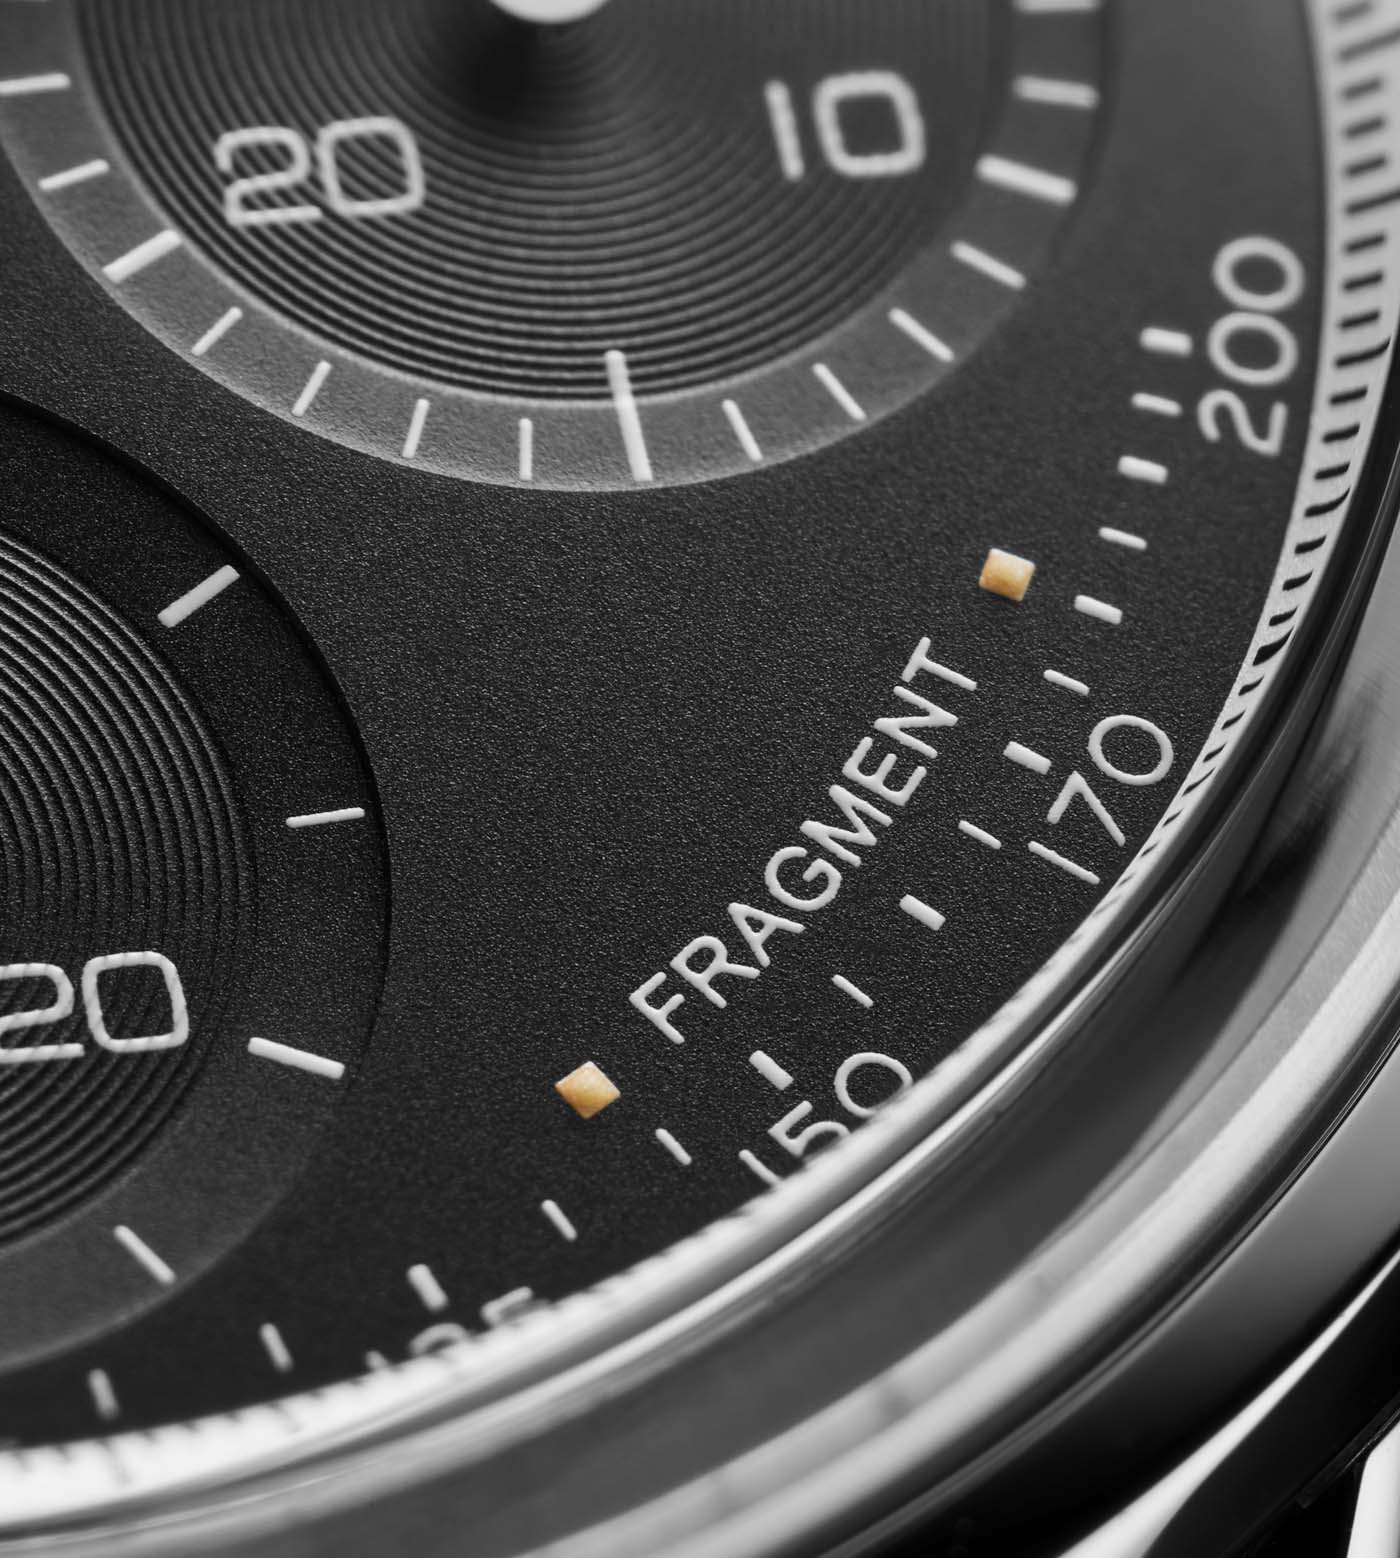 The fragment branding on the dial of the TAG Heuer Carrera Heuer 02 Fragment Limited Edition watch by Hiroshi Fujiwara